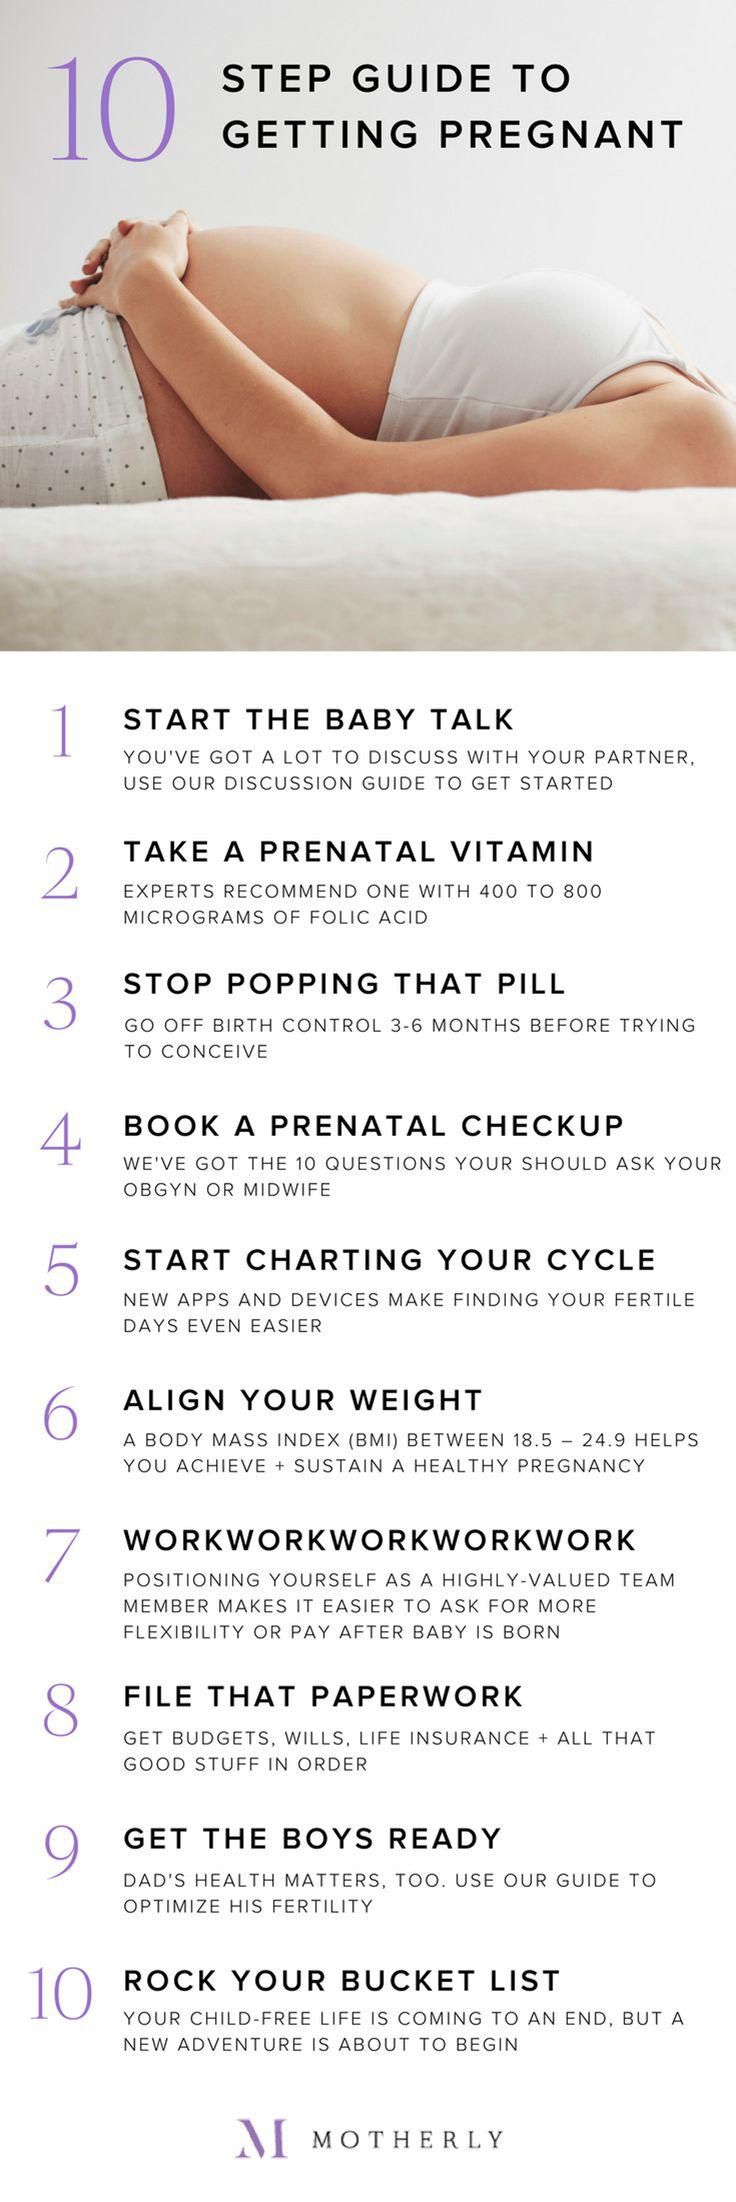 Let's make a baby: My 10-step plan to get pregnant